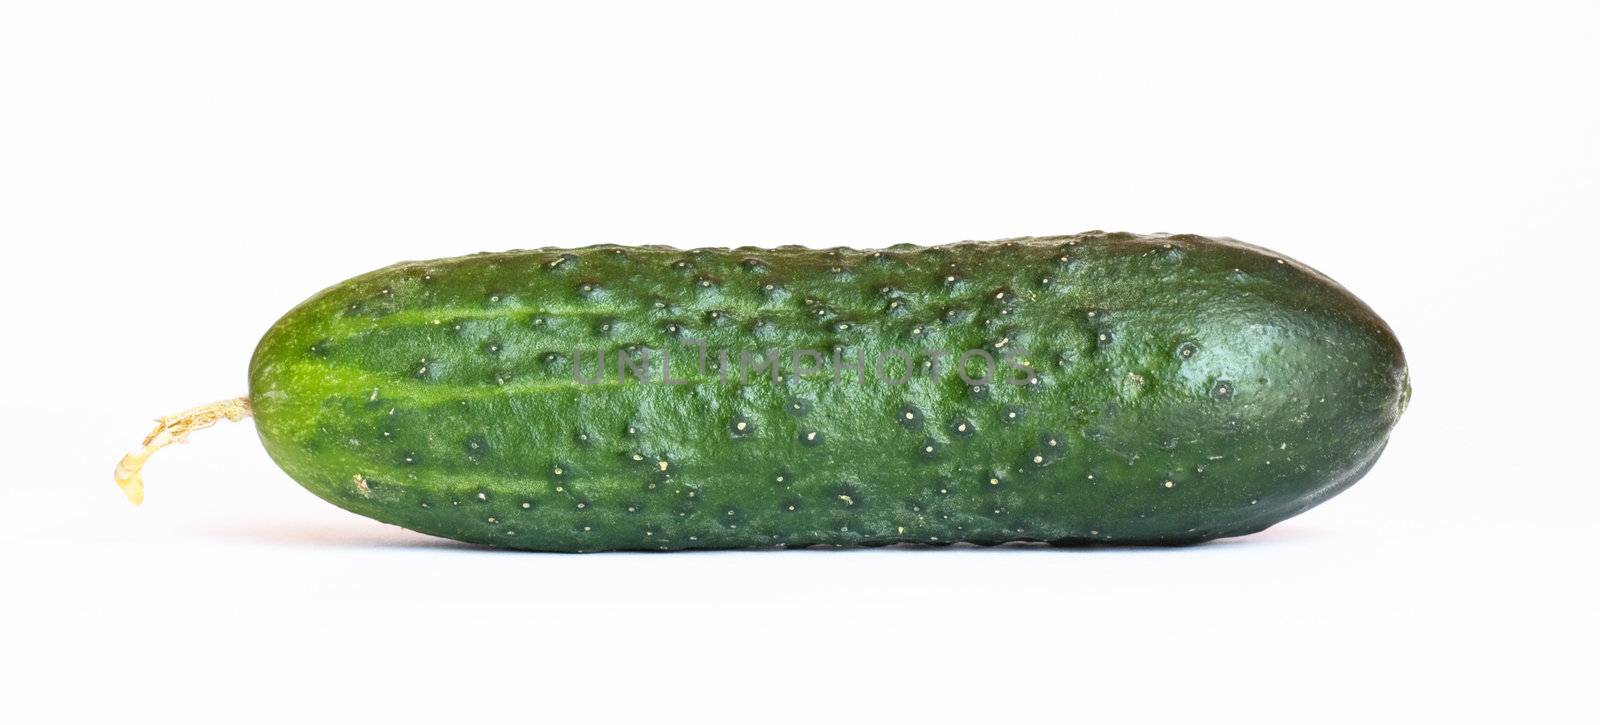 Single cucumber, isolated over white  by schankz